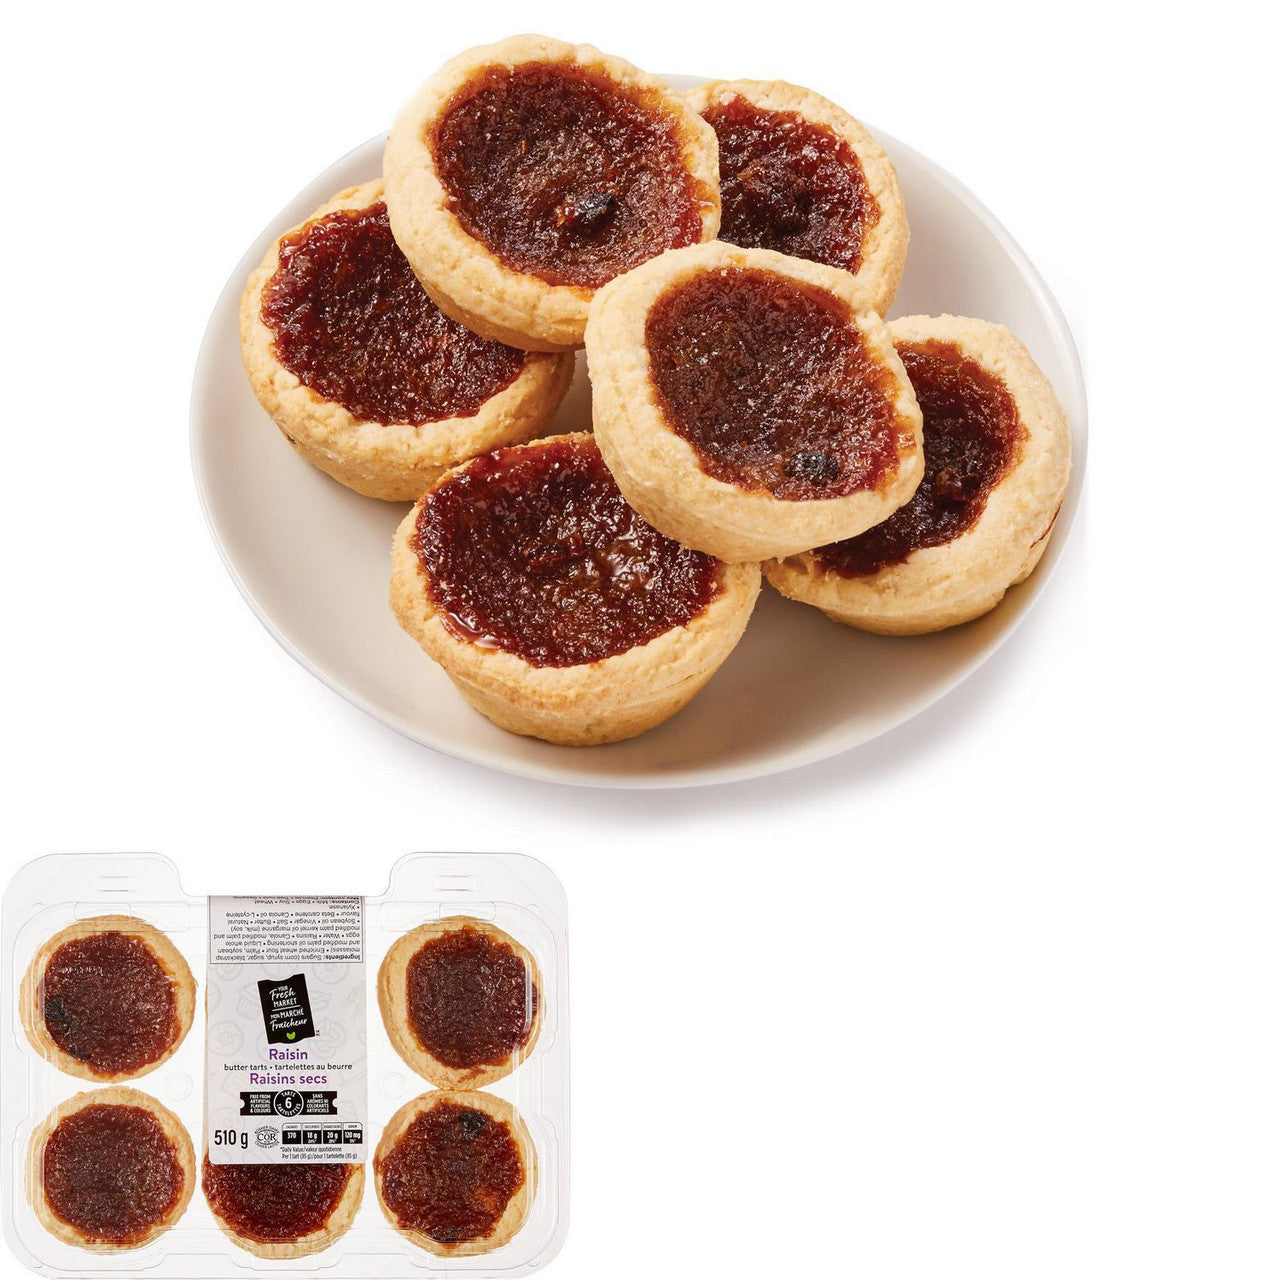 Your Fresh Market Raisin Butter Tarts, 510g/18oz., 6 Tarts, {Imported from Canada}